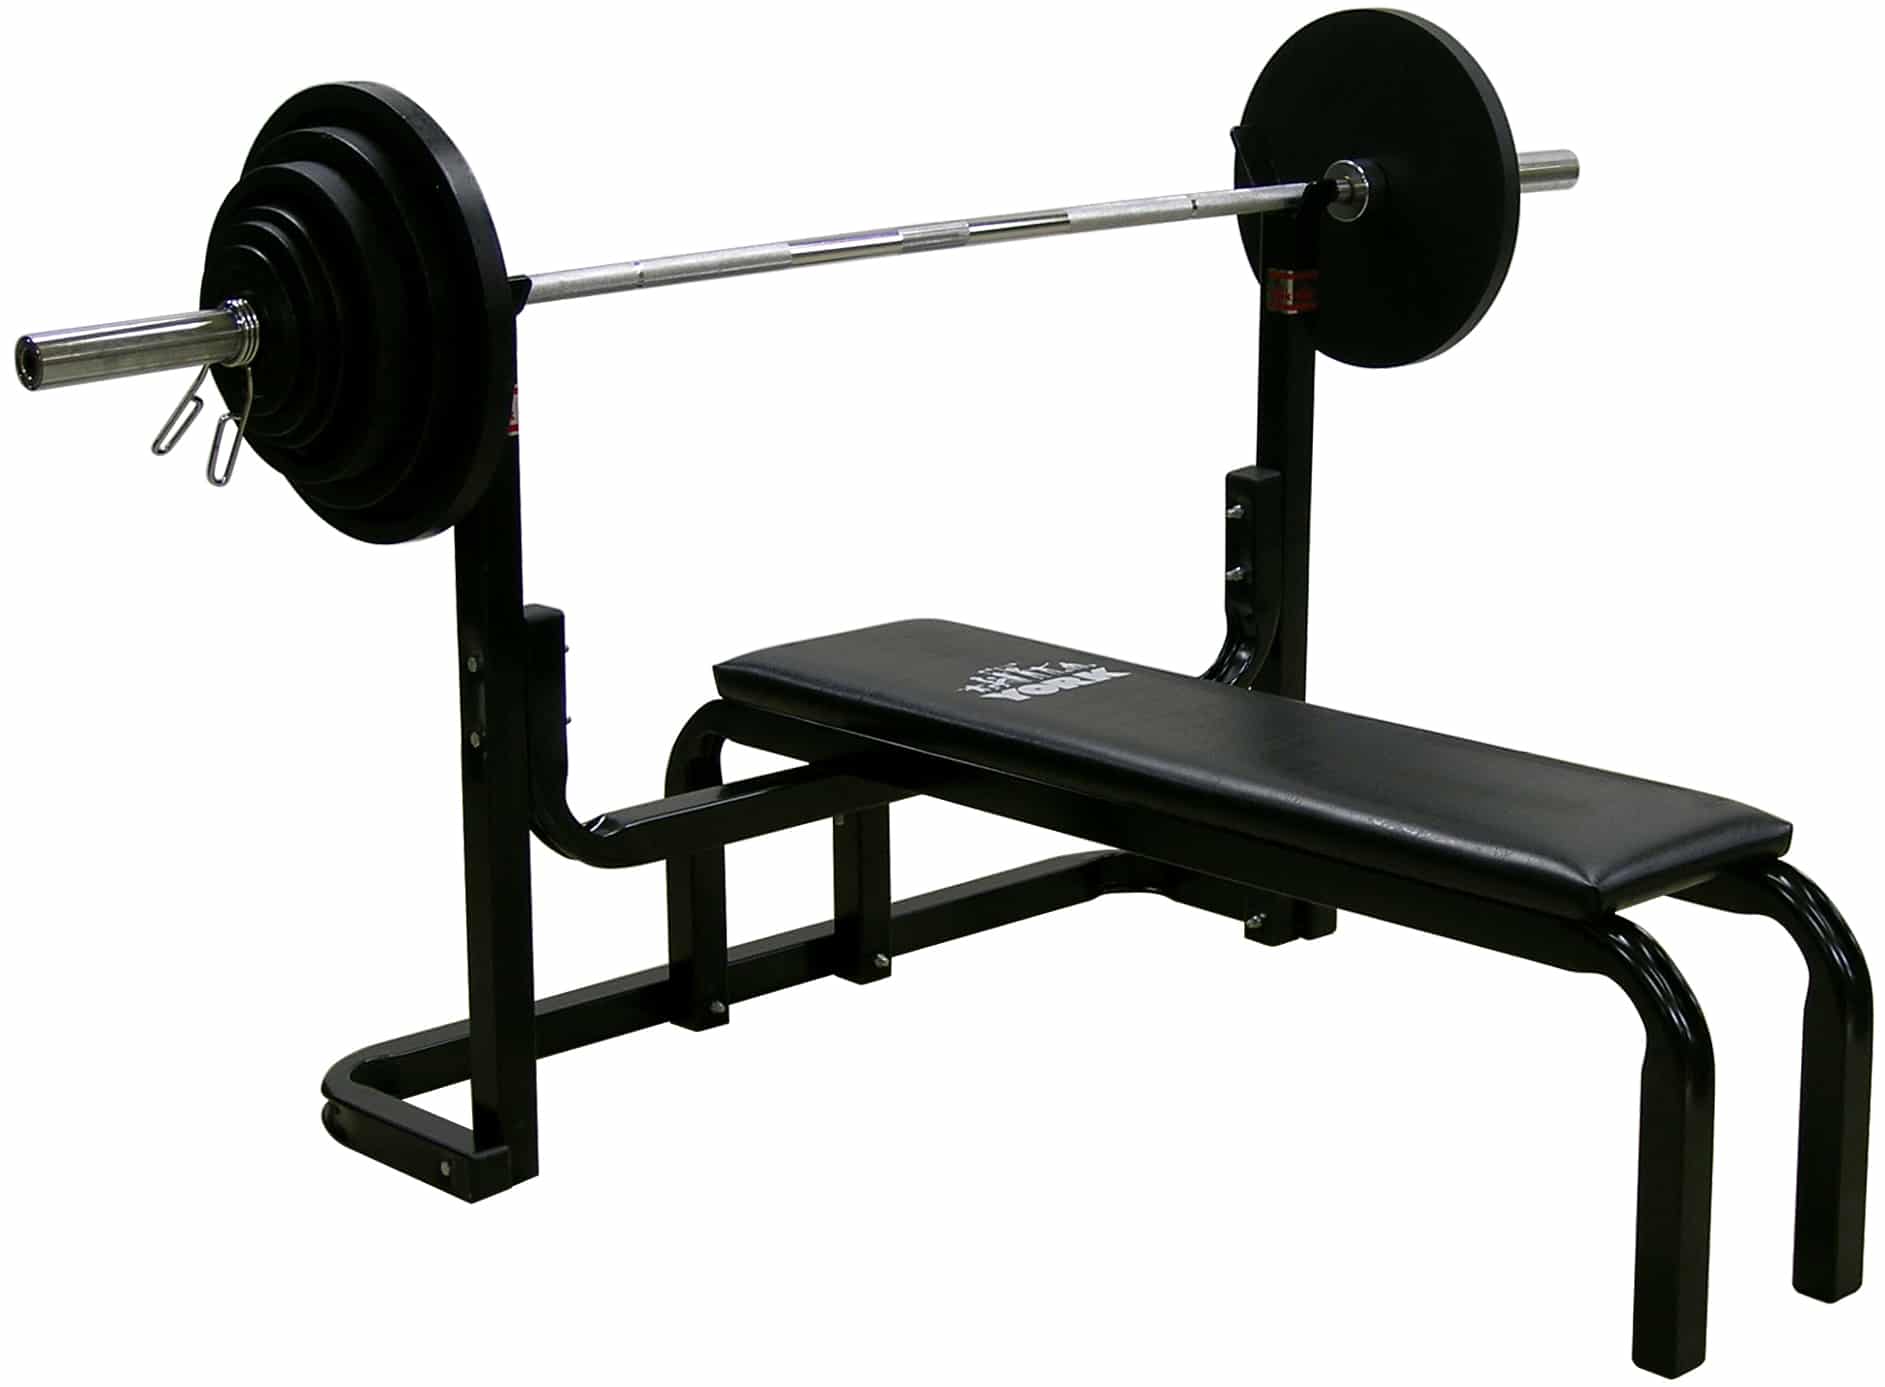 York black bench press with barbell and weight plates